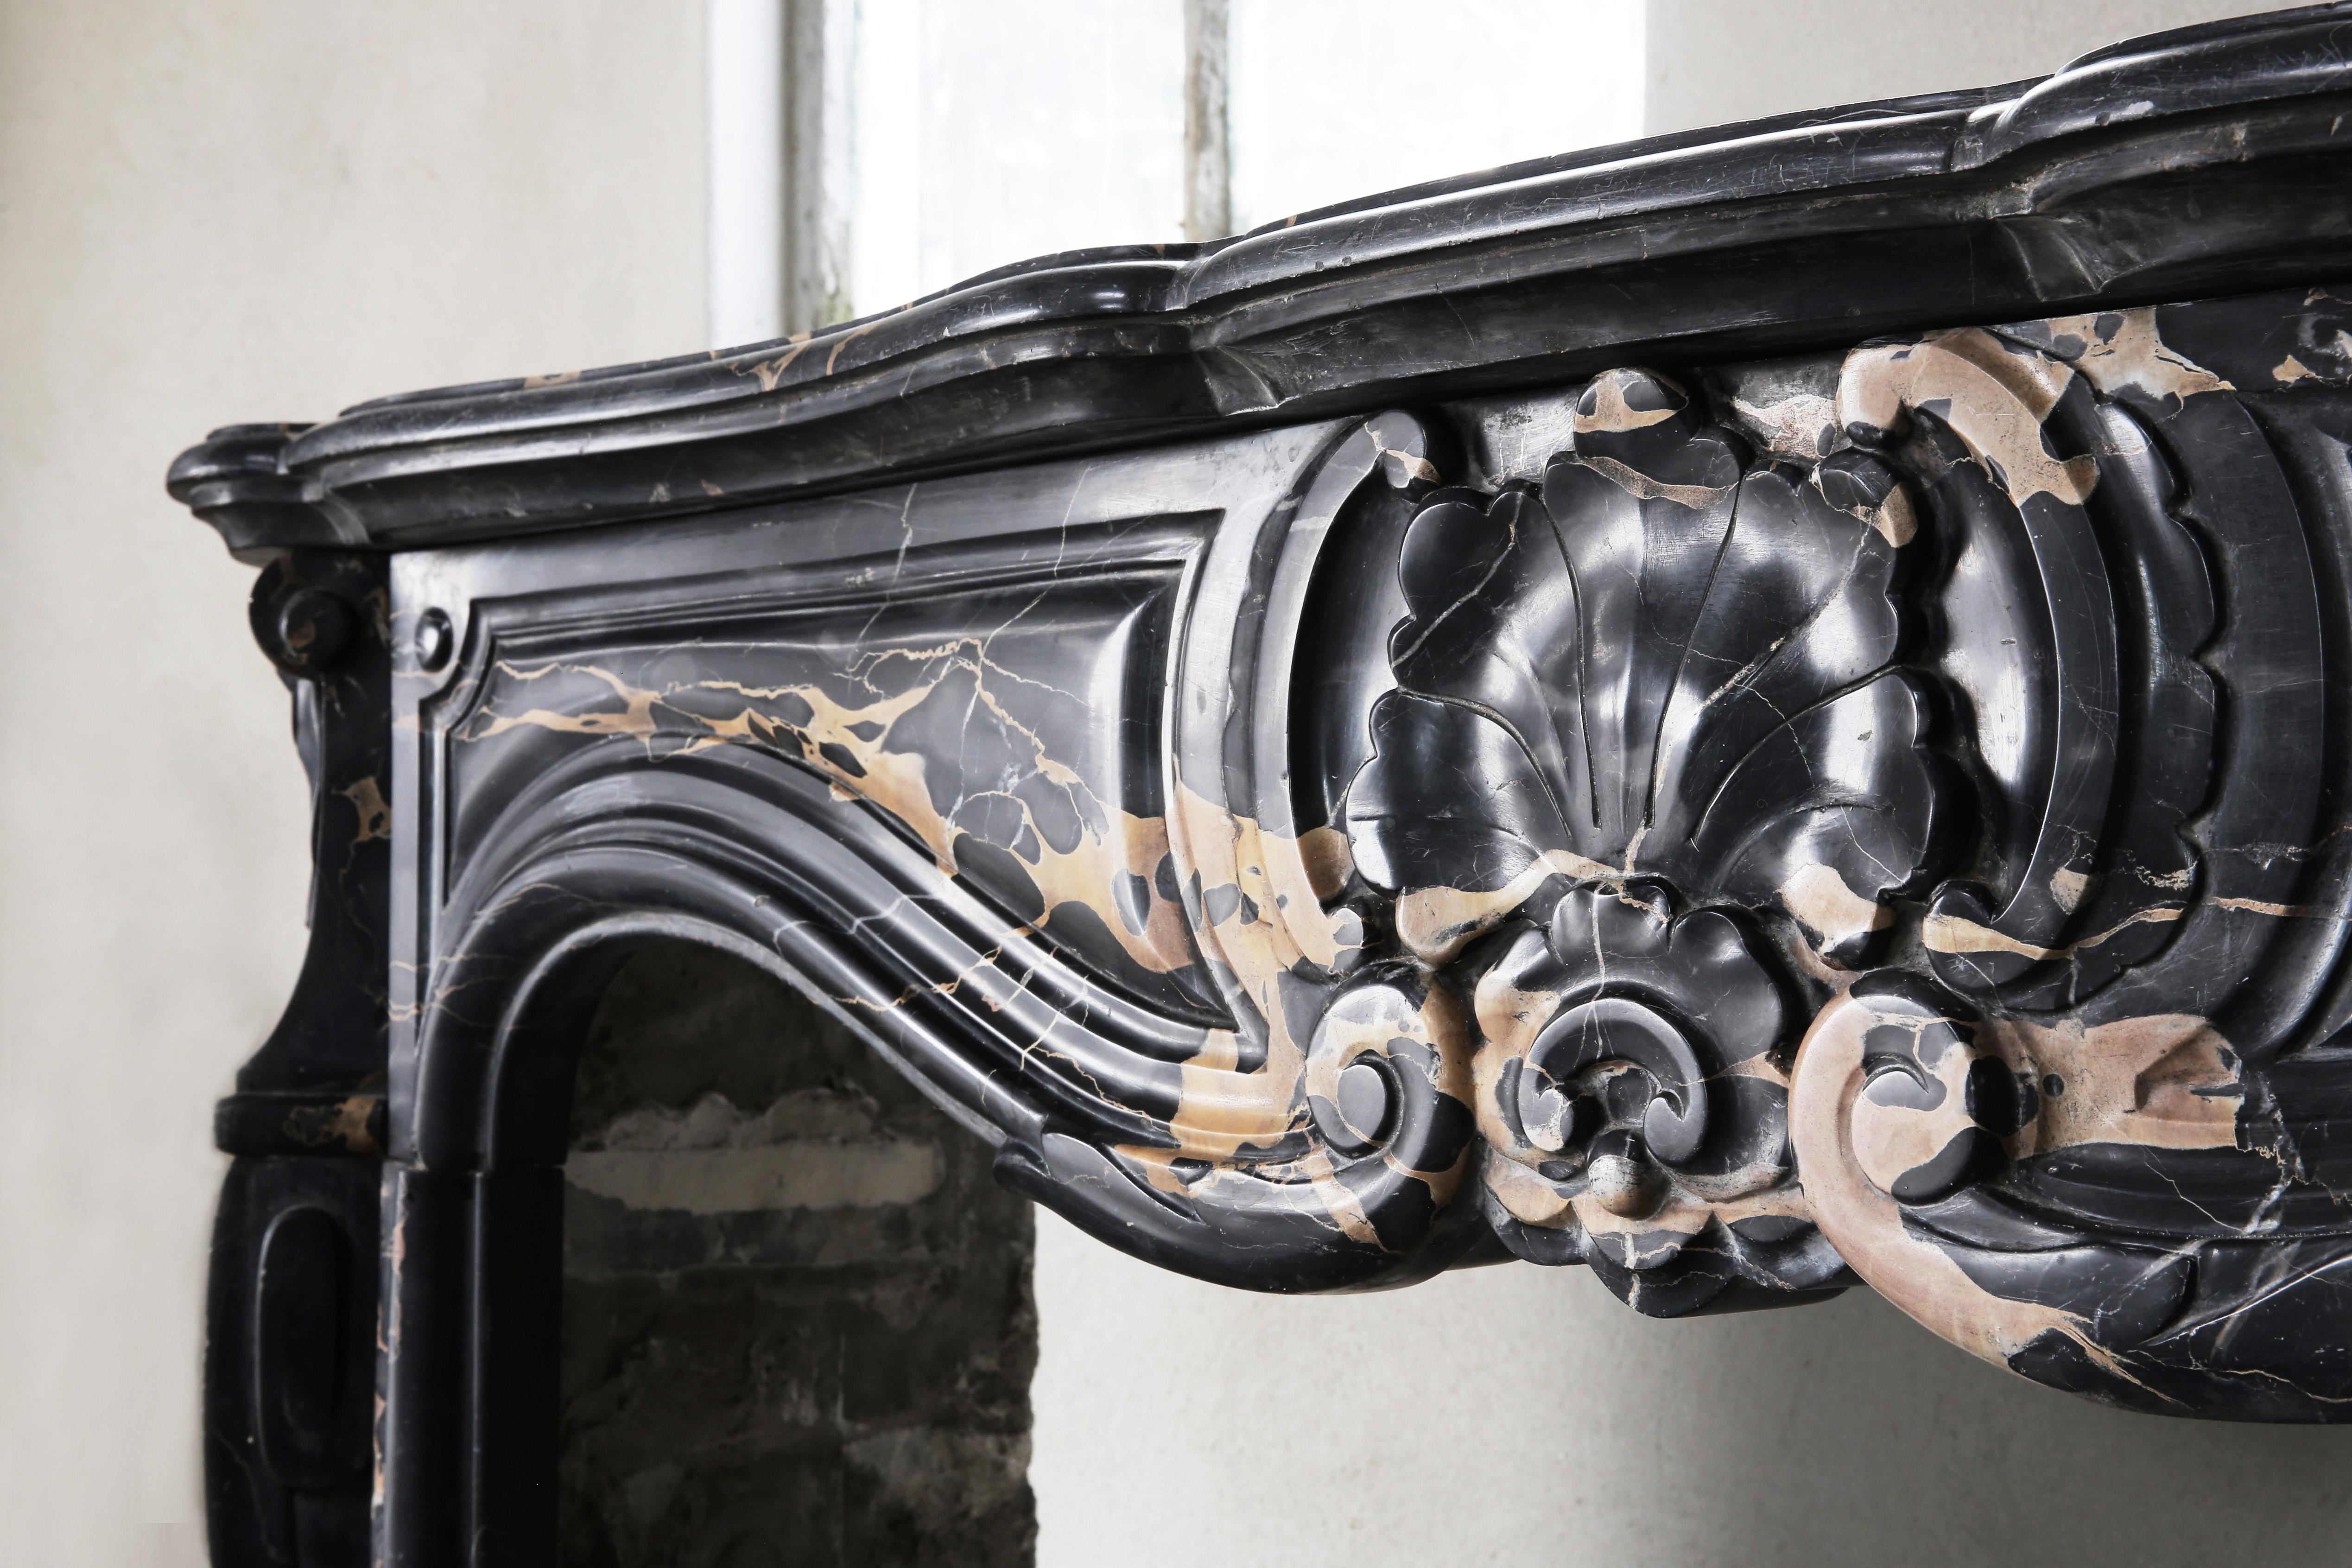 A rare antique marble fireplace from ancient Portoro marble from Tuscany. Portoro marble is one of the most elegant Italian marbles. The black background with golden veins ensures luxury and exclusivity. The chimney is in Louis XV style and dates